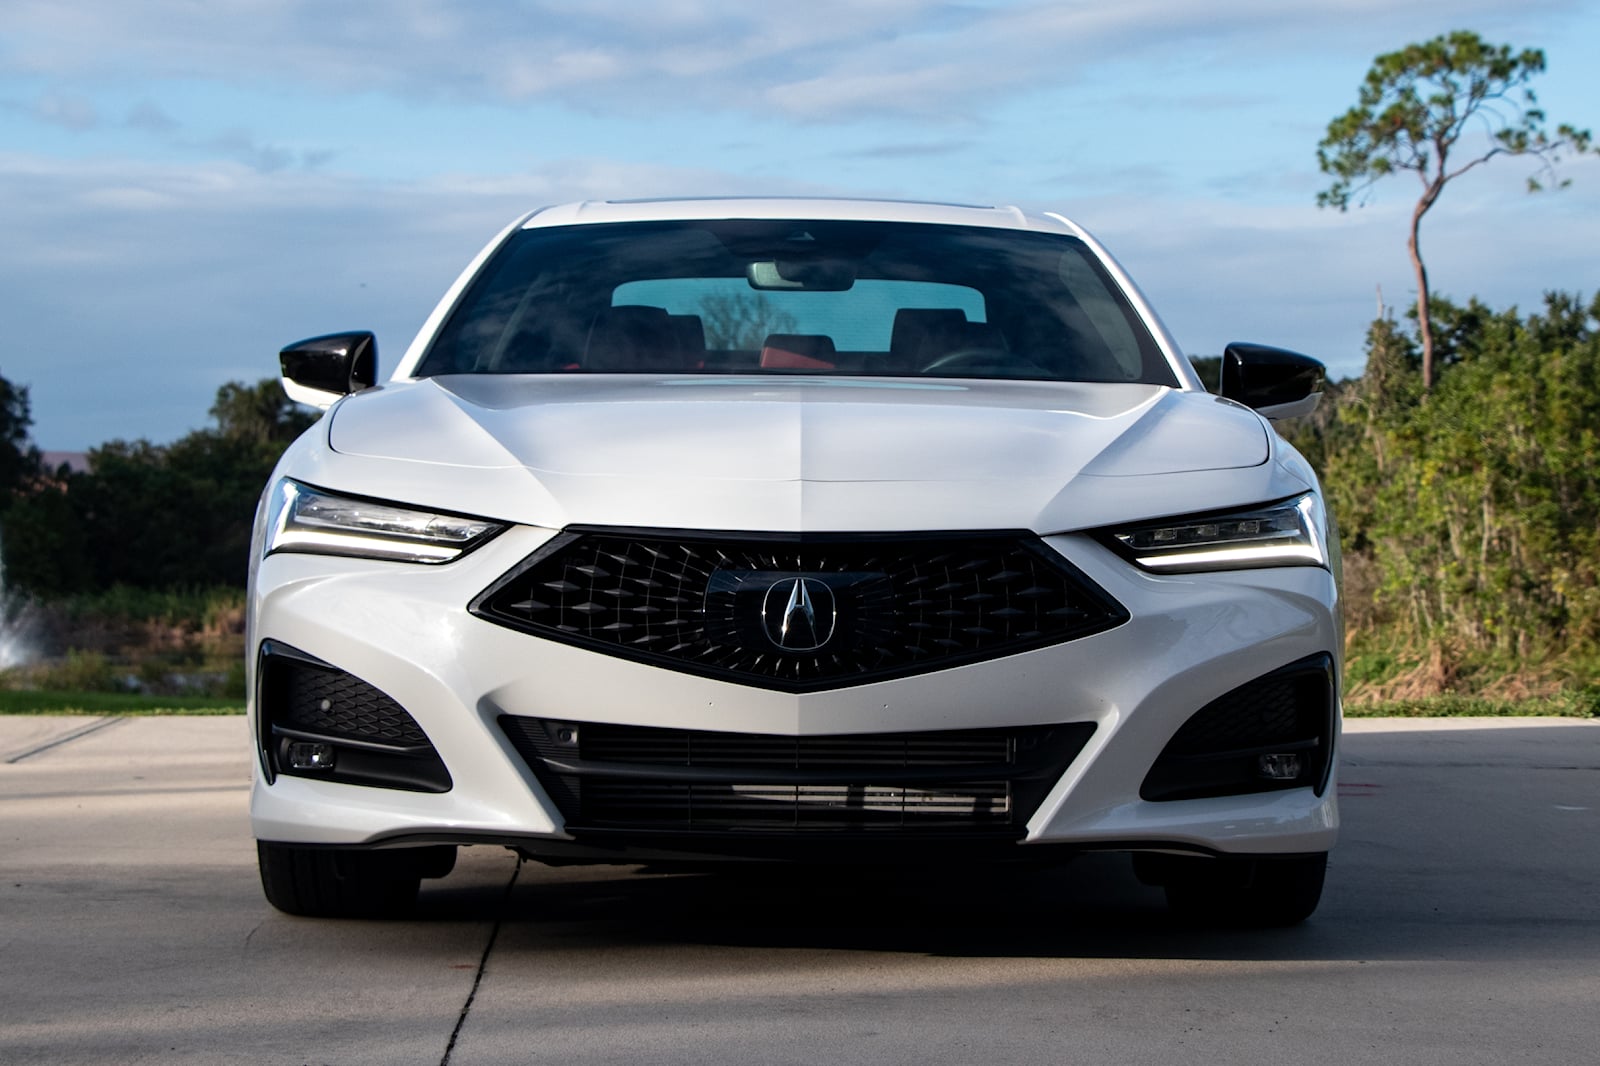 2021 Acura TLX Forward View